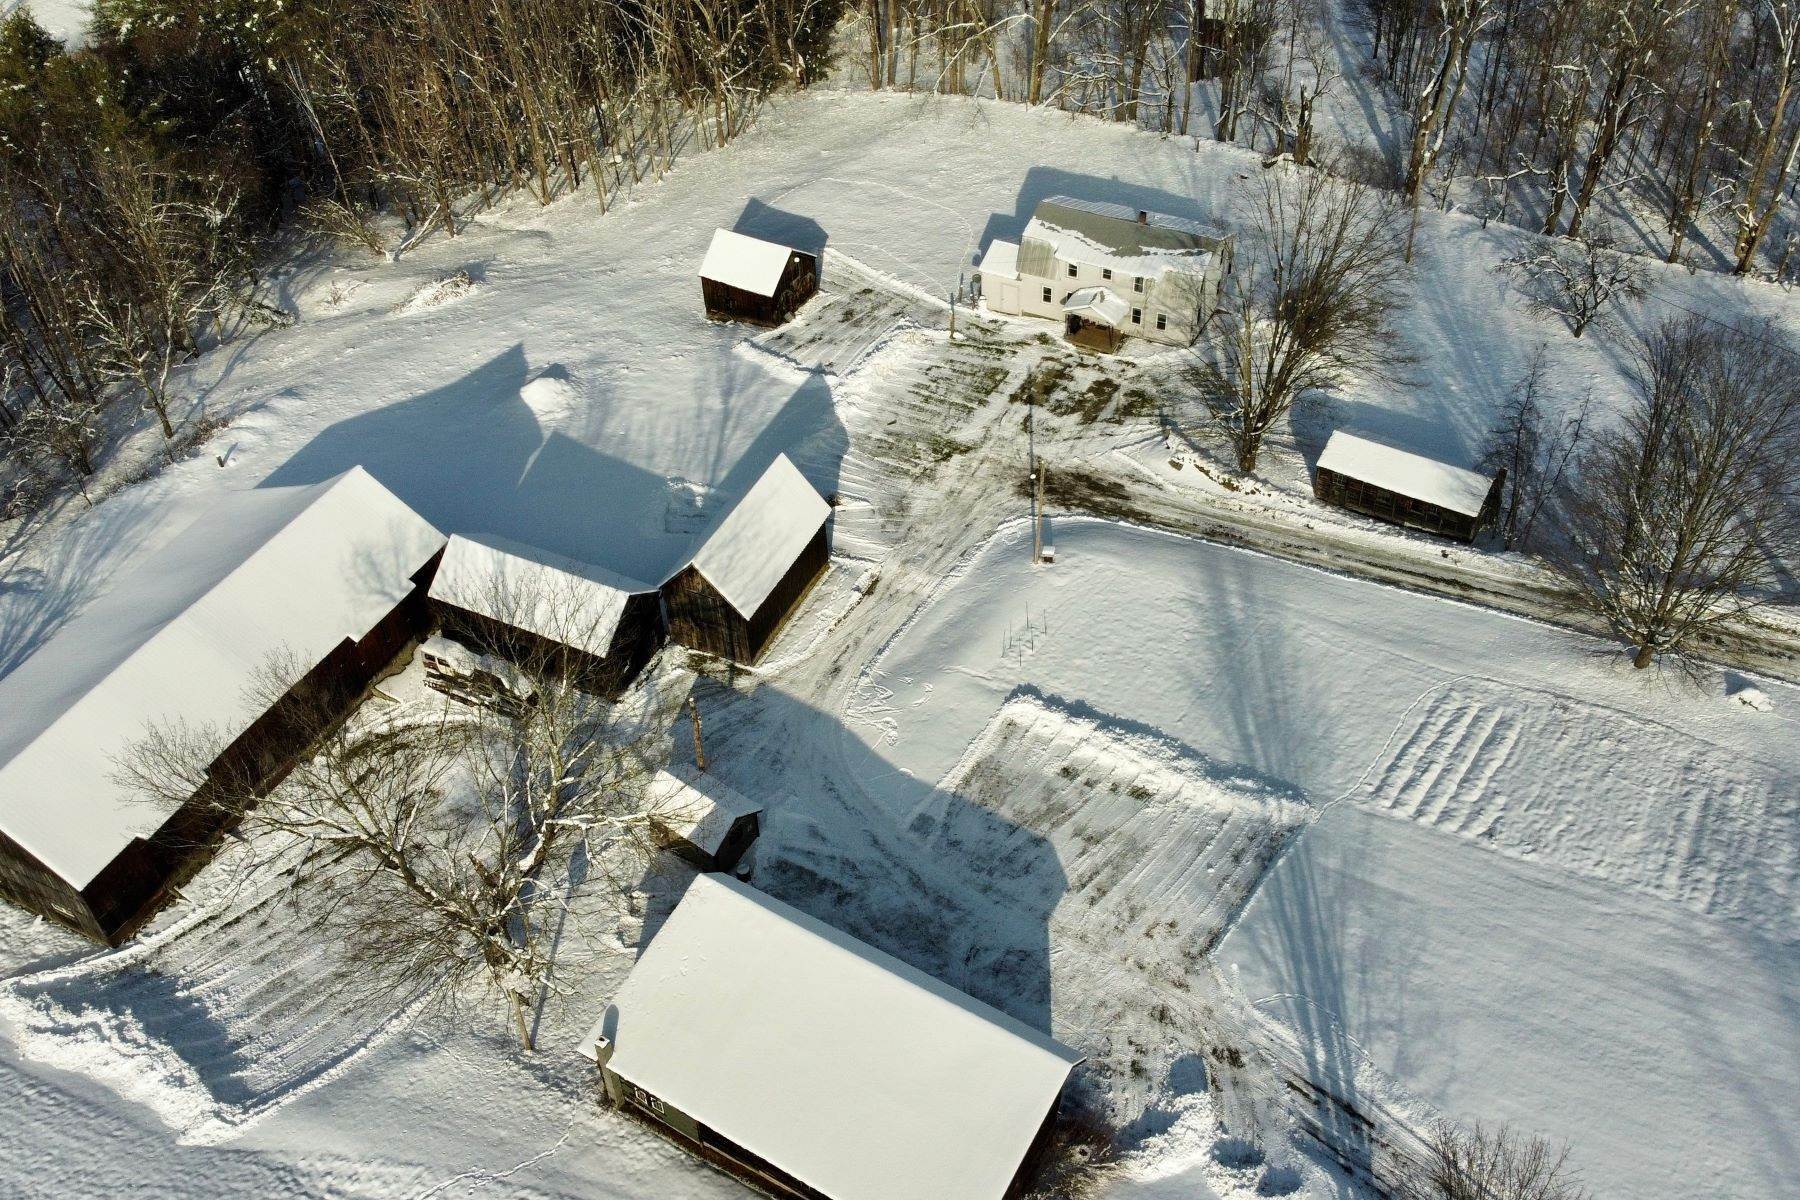 Property for Sale at Farmhouse on 27 Acres in Thetford 390 Clay Road, Thetford, VT 05054